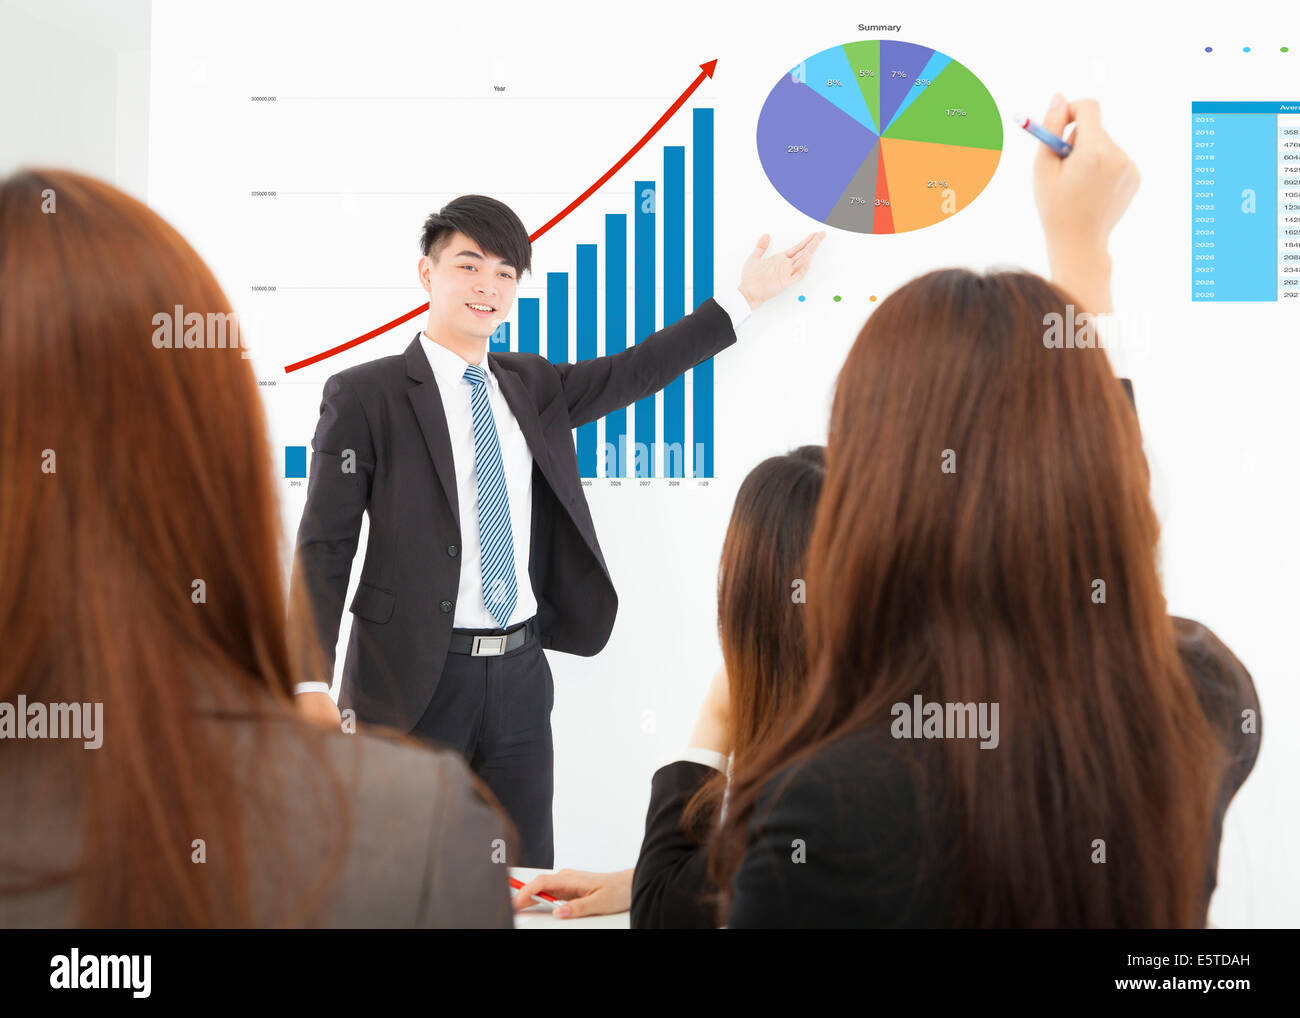 businessman giving a presentation about marketing sales Stock Photo